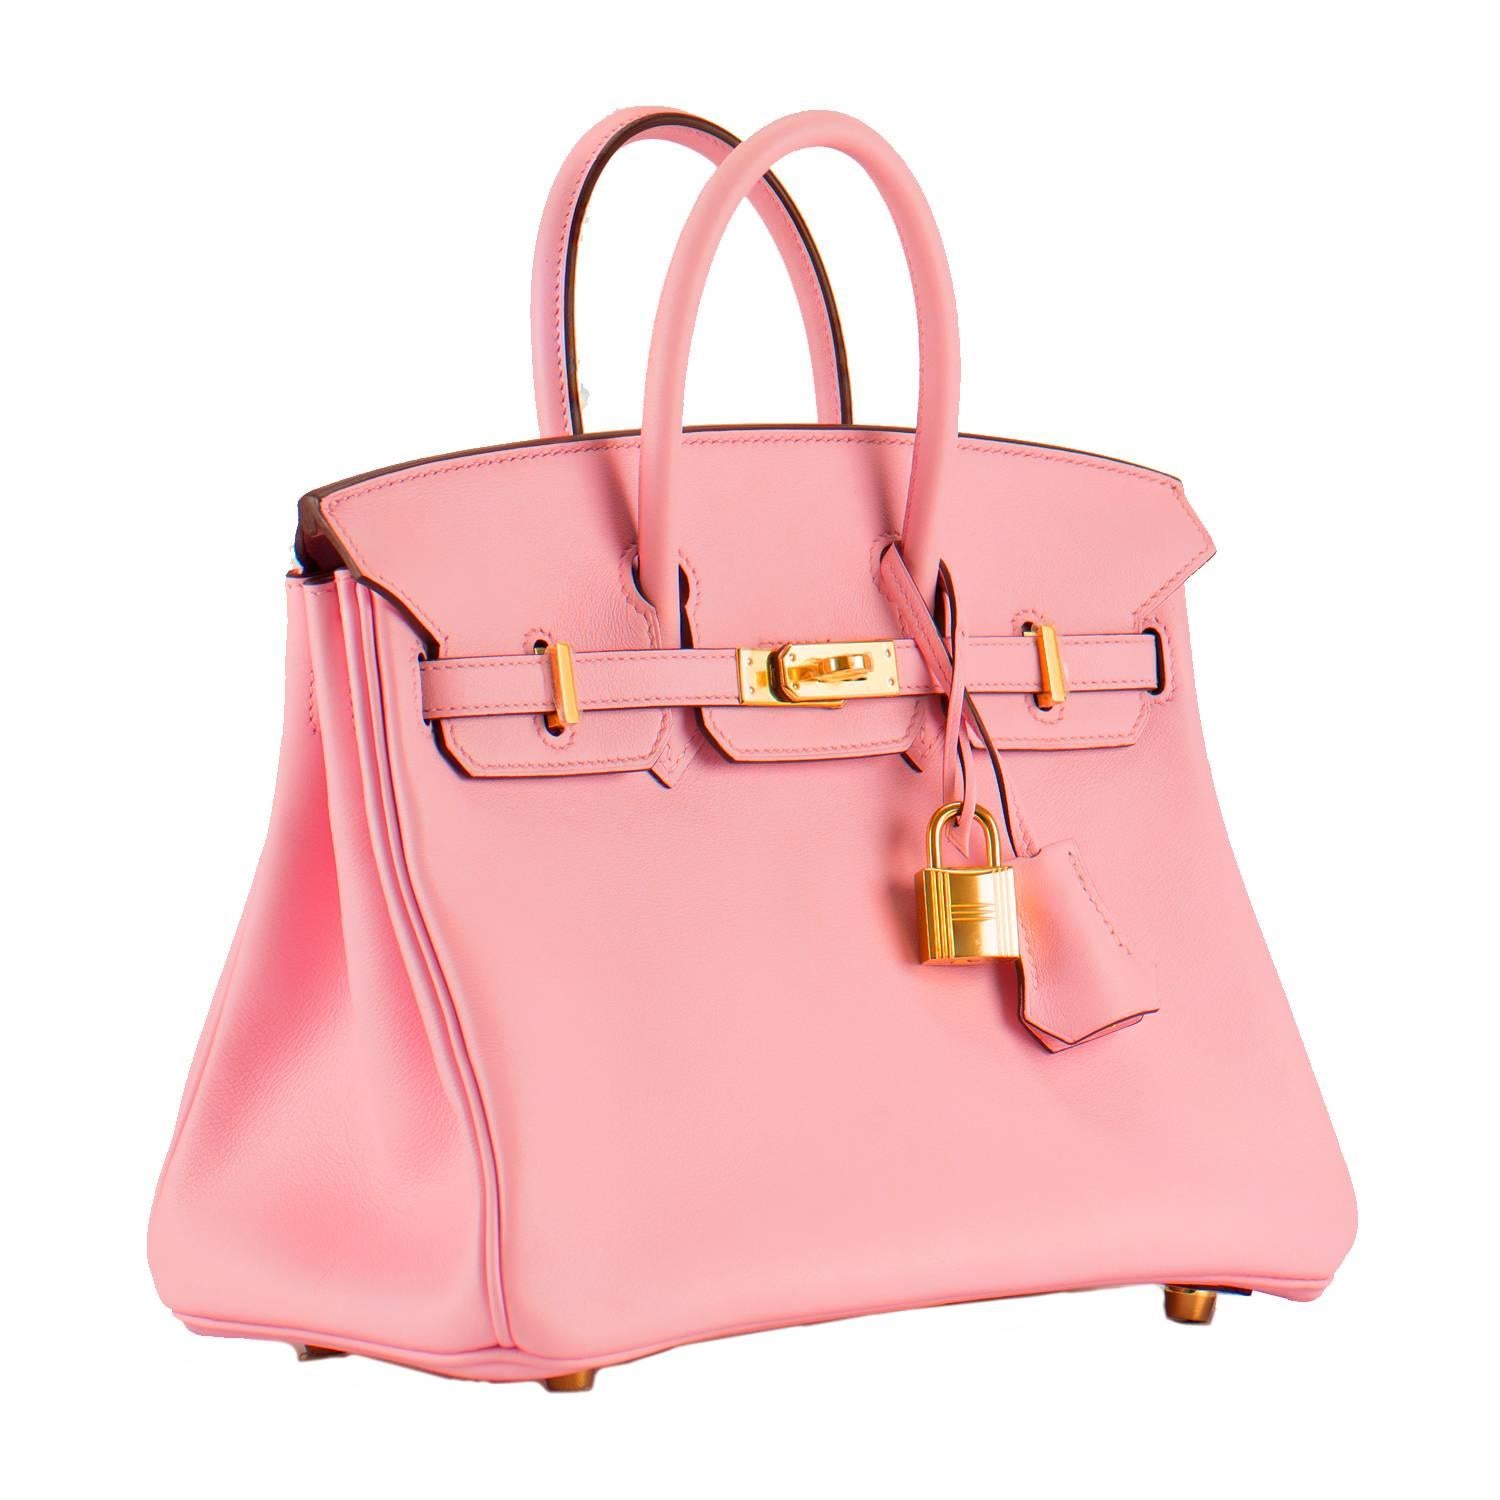 Hermes Handbag Birkin 25 Swift Pink Sakura Gold Hardware 2016.

Pre-owned and never used.

Bought it in Hermes store in 2016.

Composition: Leather.

Model: Birkin.

Size: 25cm width x 20cm height x 13cm length.

Color:Rose